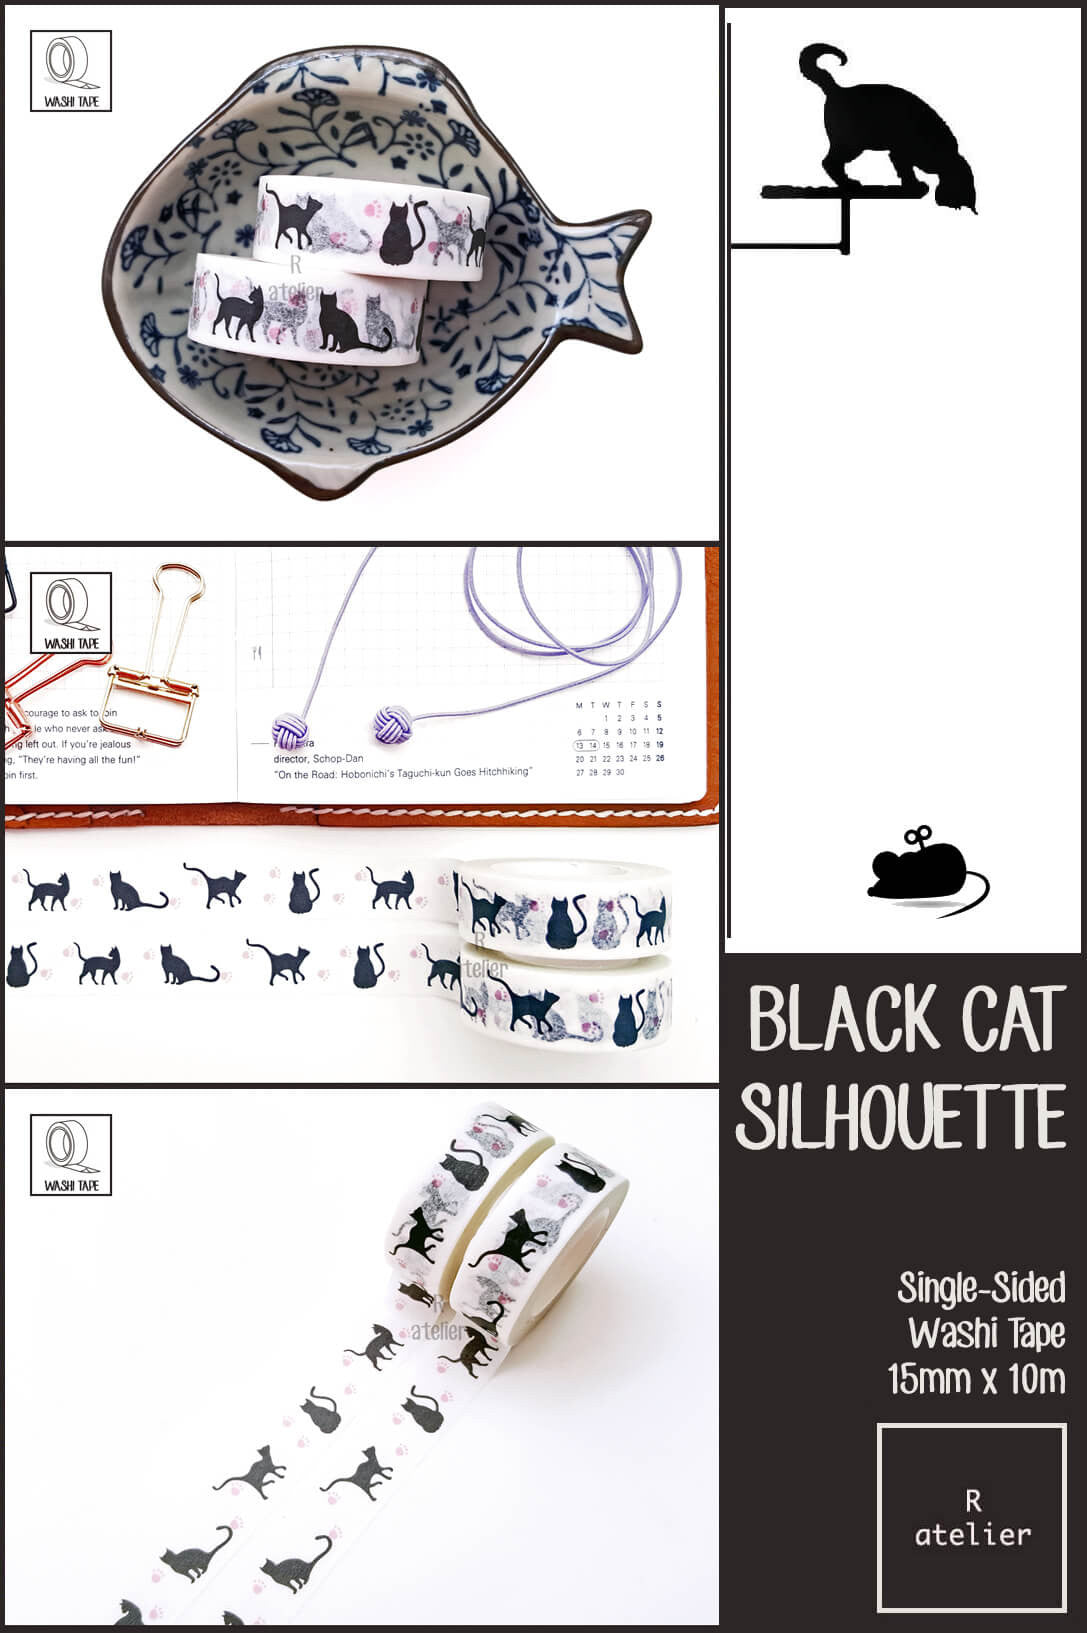 Black Cat Silhouette Washi Tapes | 15mm x 10m